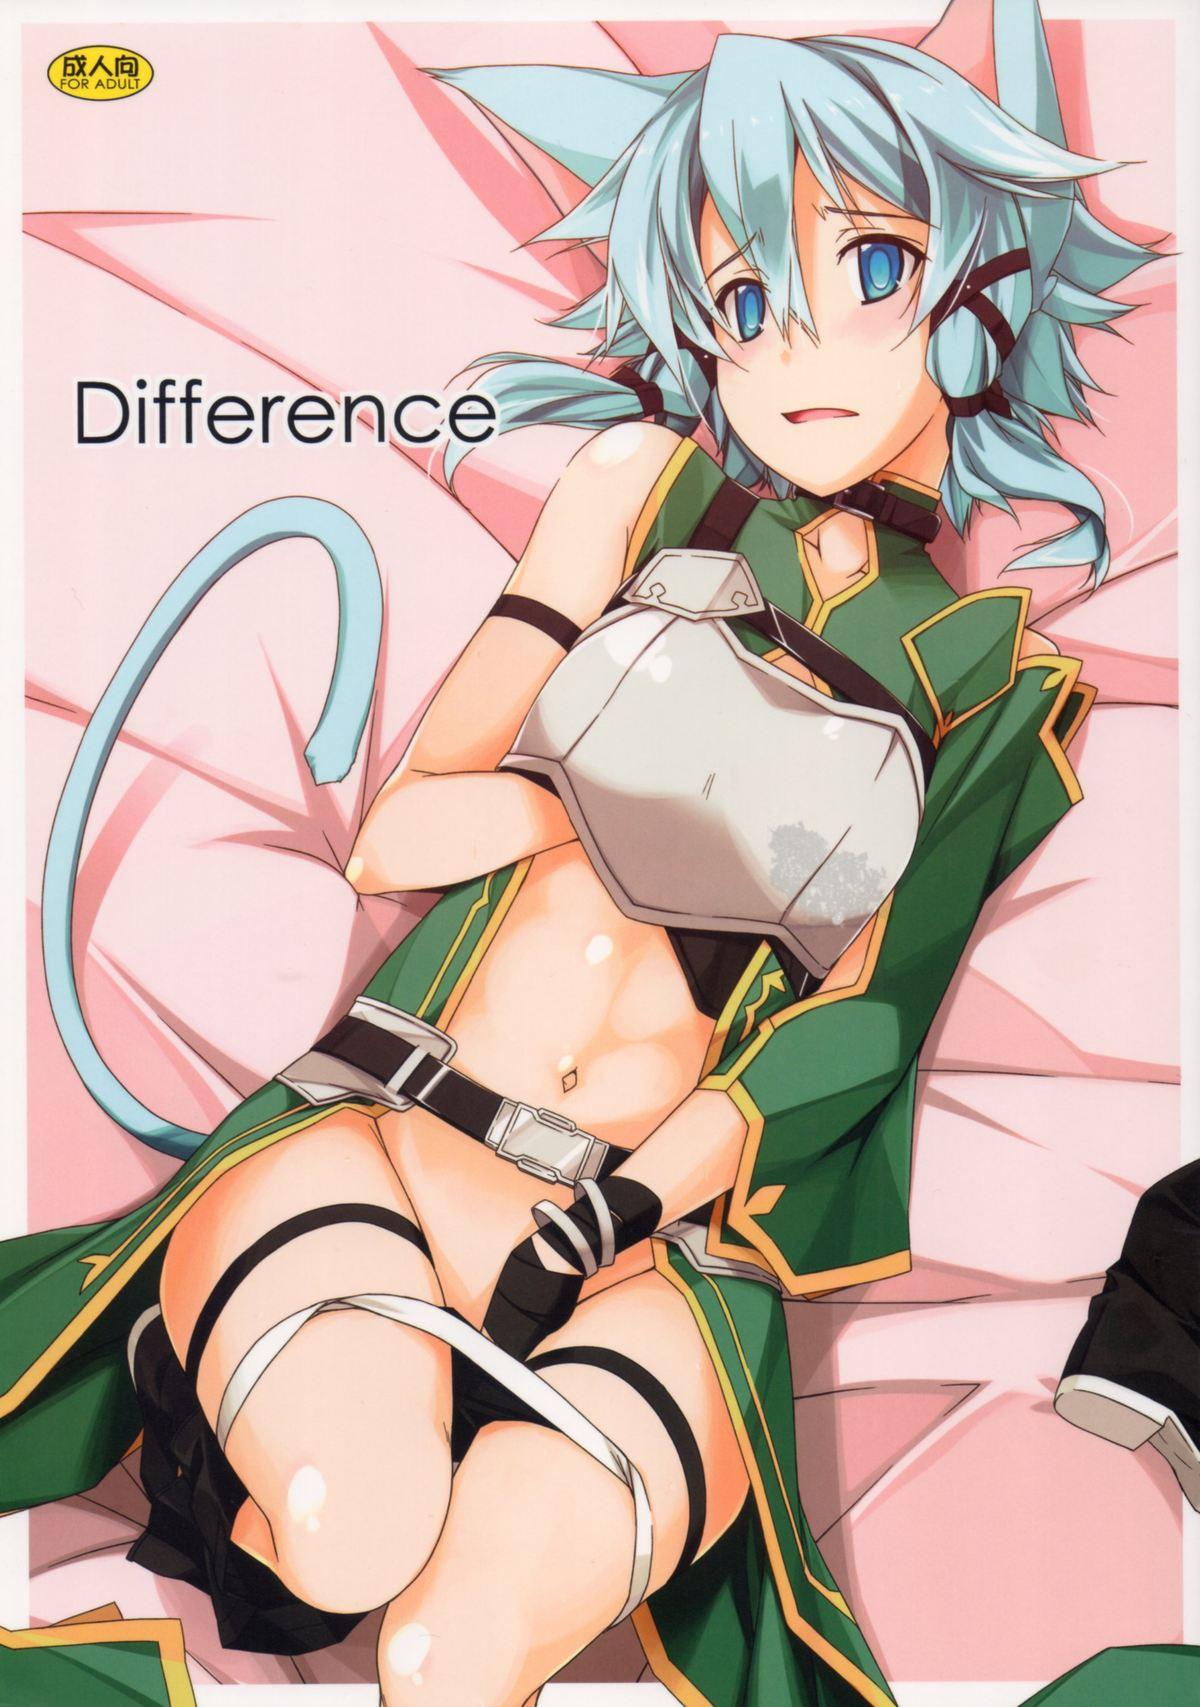 Big Tits Difference - Sword art online Hairypussy - Page 1